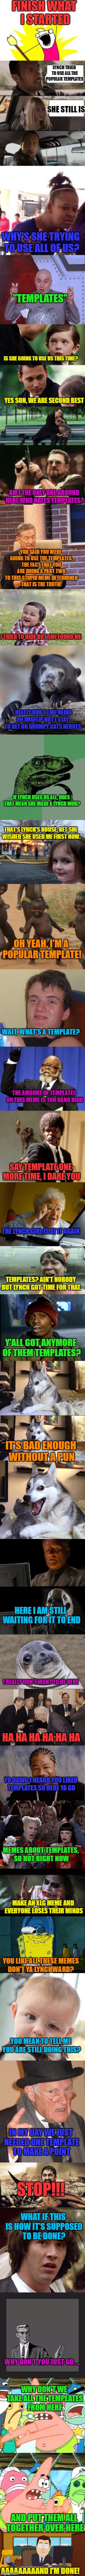 Well That Escalated Quickly Part 2 | FINISH WHAT I STARTED; LYNCH TRIED TO USE ALL THE POPULAR TEMPLATES; SHE STILL IS; WHY'S SHE TRYING TO USE ALL OF US? "TEMPLATES"; IS SHE GOING TO USE US THIS TIME? YES SON, WE ARE SECOND BEST; AM I THE ONLY ONE AROUND HERE WHO HATES TEMPLATES? YOU SAID YOU WERE GOING TO USE THE TEMPLATES, THE FACT THAT YOU ARE DOING A PART TWO TO THIS STUPID MEME DETERMINED THAT IS THE TRUTH! I TRIED TO HIDE BUT SHE FOUND ME; I REALLY DON'T LIKE BEING ON IMGFLIP BUT I STAY TO GET ON GRUMPY CATS NERVES; IF LYNCH USES US ALL, DOES THAT MEAN SHE MADE A LYNCH MOB? THAT'S LYNCH'S HOUSE, BET SHE WISHED SHE USED ME FIRST NOW. OH YEAH, I'M A POPULAR TEMPLATE! WAIT, WHAT'S A TEMPLATE? THE AMOUNT OF TEMPLATES ON THIS MEME IS TOO DANG HIGH; SAY TEMPLATE ONE MORE TIME, I DARE YOU; THE LYNCH GIRL IS AT IT AGAIN; TEMPLATES? AIN'T NOBODY BUT LYNCH GOT TIME FOR THAT. Y'ALL GOT ANYMORE OF THEM TEMPLATES? IT'S BAD ENOUGH WITHOUT A PUN; HERE I AM STILL WAITING FOR IT TO END; I REALLY DON'T WANT TO BE HERE; HA HA HA HA HA HA; YO DAWG I HEARD YOU LIKED TEMPLATES SO HERE YA GO; MEMES ABOUT TEMPLATES, SO HOT RIGHT NOW; MAKE AN XLG MEME AND EVERYONE LOSES THEIR MINDS; YOU LIKE ALL THESE MEMES DON'T YA LYNCHWARD? YOU MEAN TO TELL ME YOU ARE STILL DOING THIS? IN MY DAY WE JUST NEEDED ONE TEMPLATE TO MAKE A POINT; STOP!!! WHAT IF THIS IS HOW IT'S SUPPOSED TO BE DONE? WHY DON'T YOU JUST GO..... WHY DON'T WE TAKE ALL THE TEMPLATES FROM HERE; AND PUT THEM ALL TOGETHER OVER HERE; AAAAAAAAAND I'M DONE! | image tagged in still a better love story than twilight,memes,lol,lynch1979,templates | made w/ Imgflip meme maker